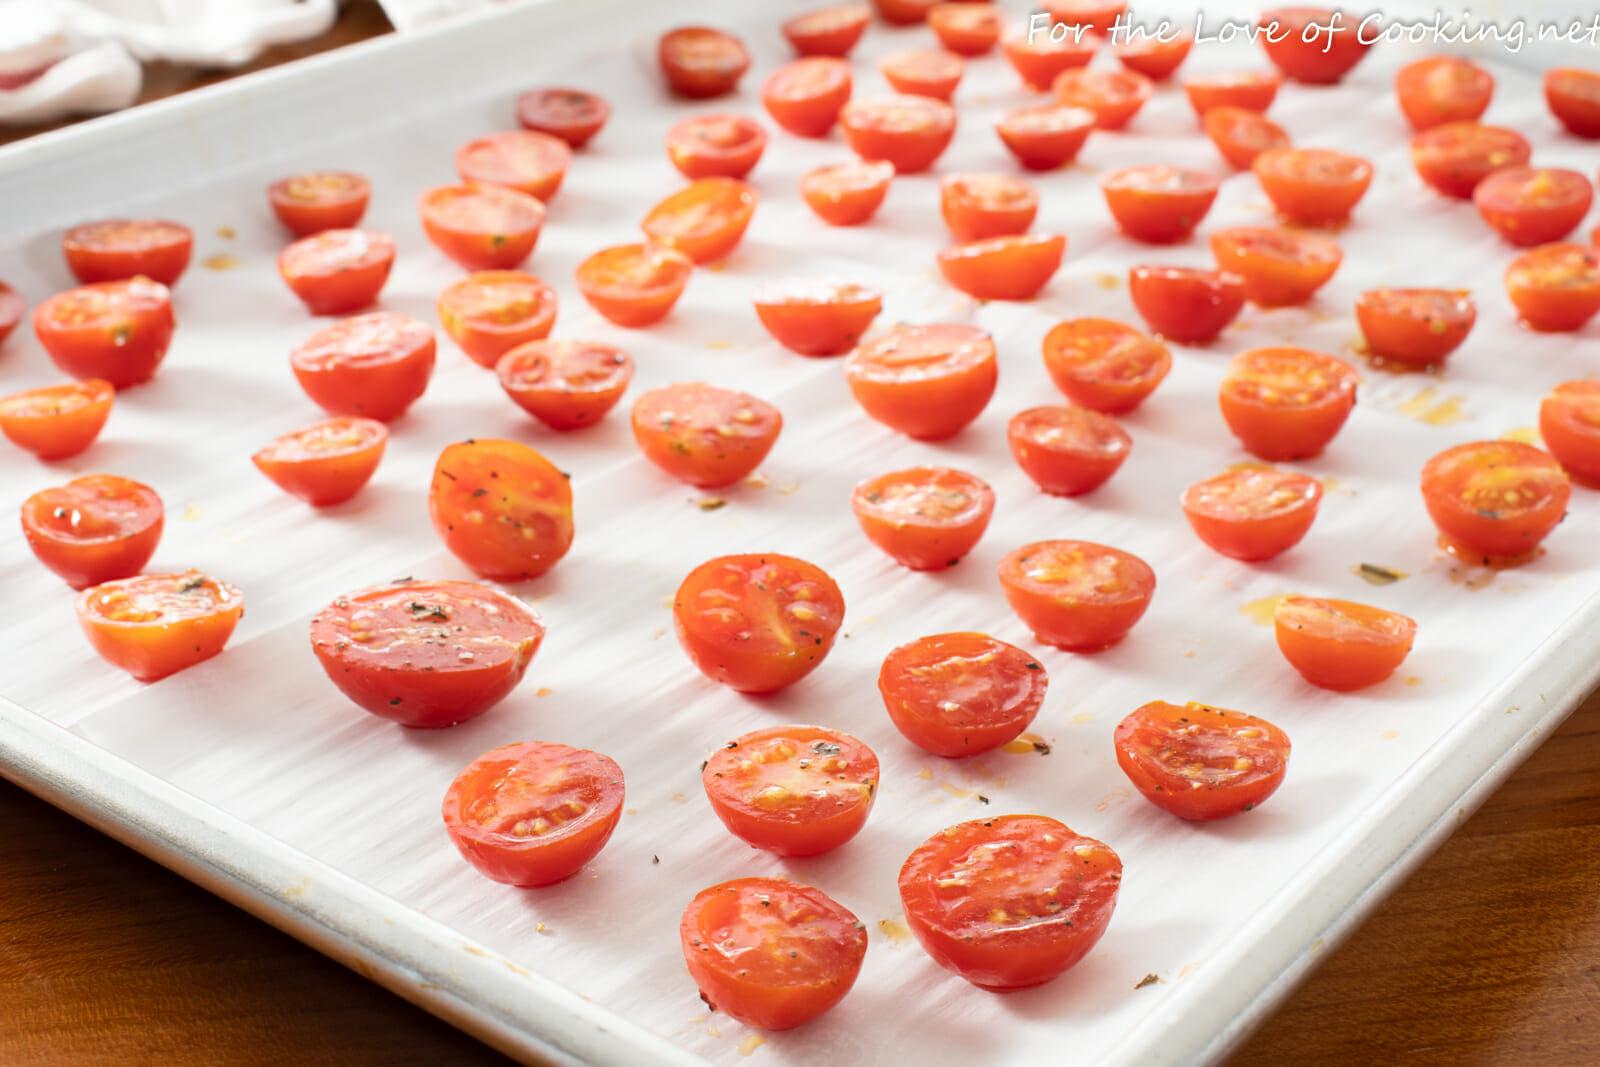 Oven "Sun-Dried" Tomatoes